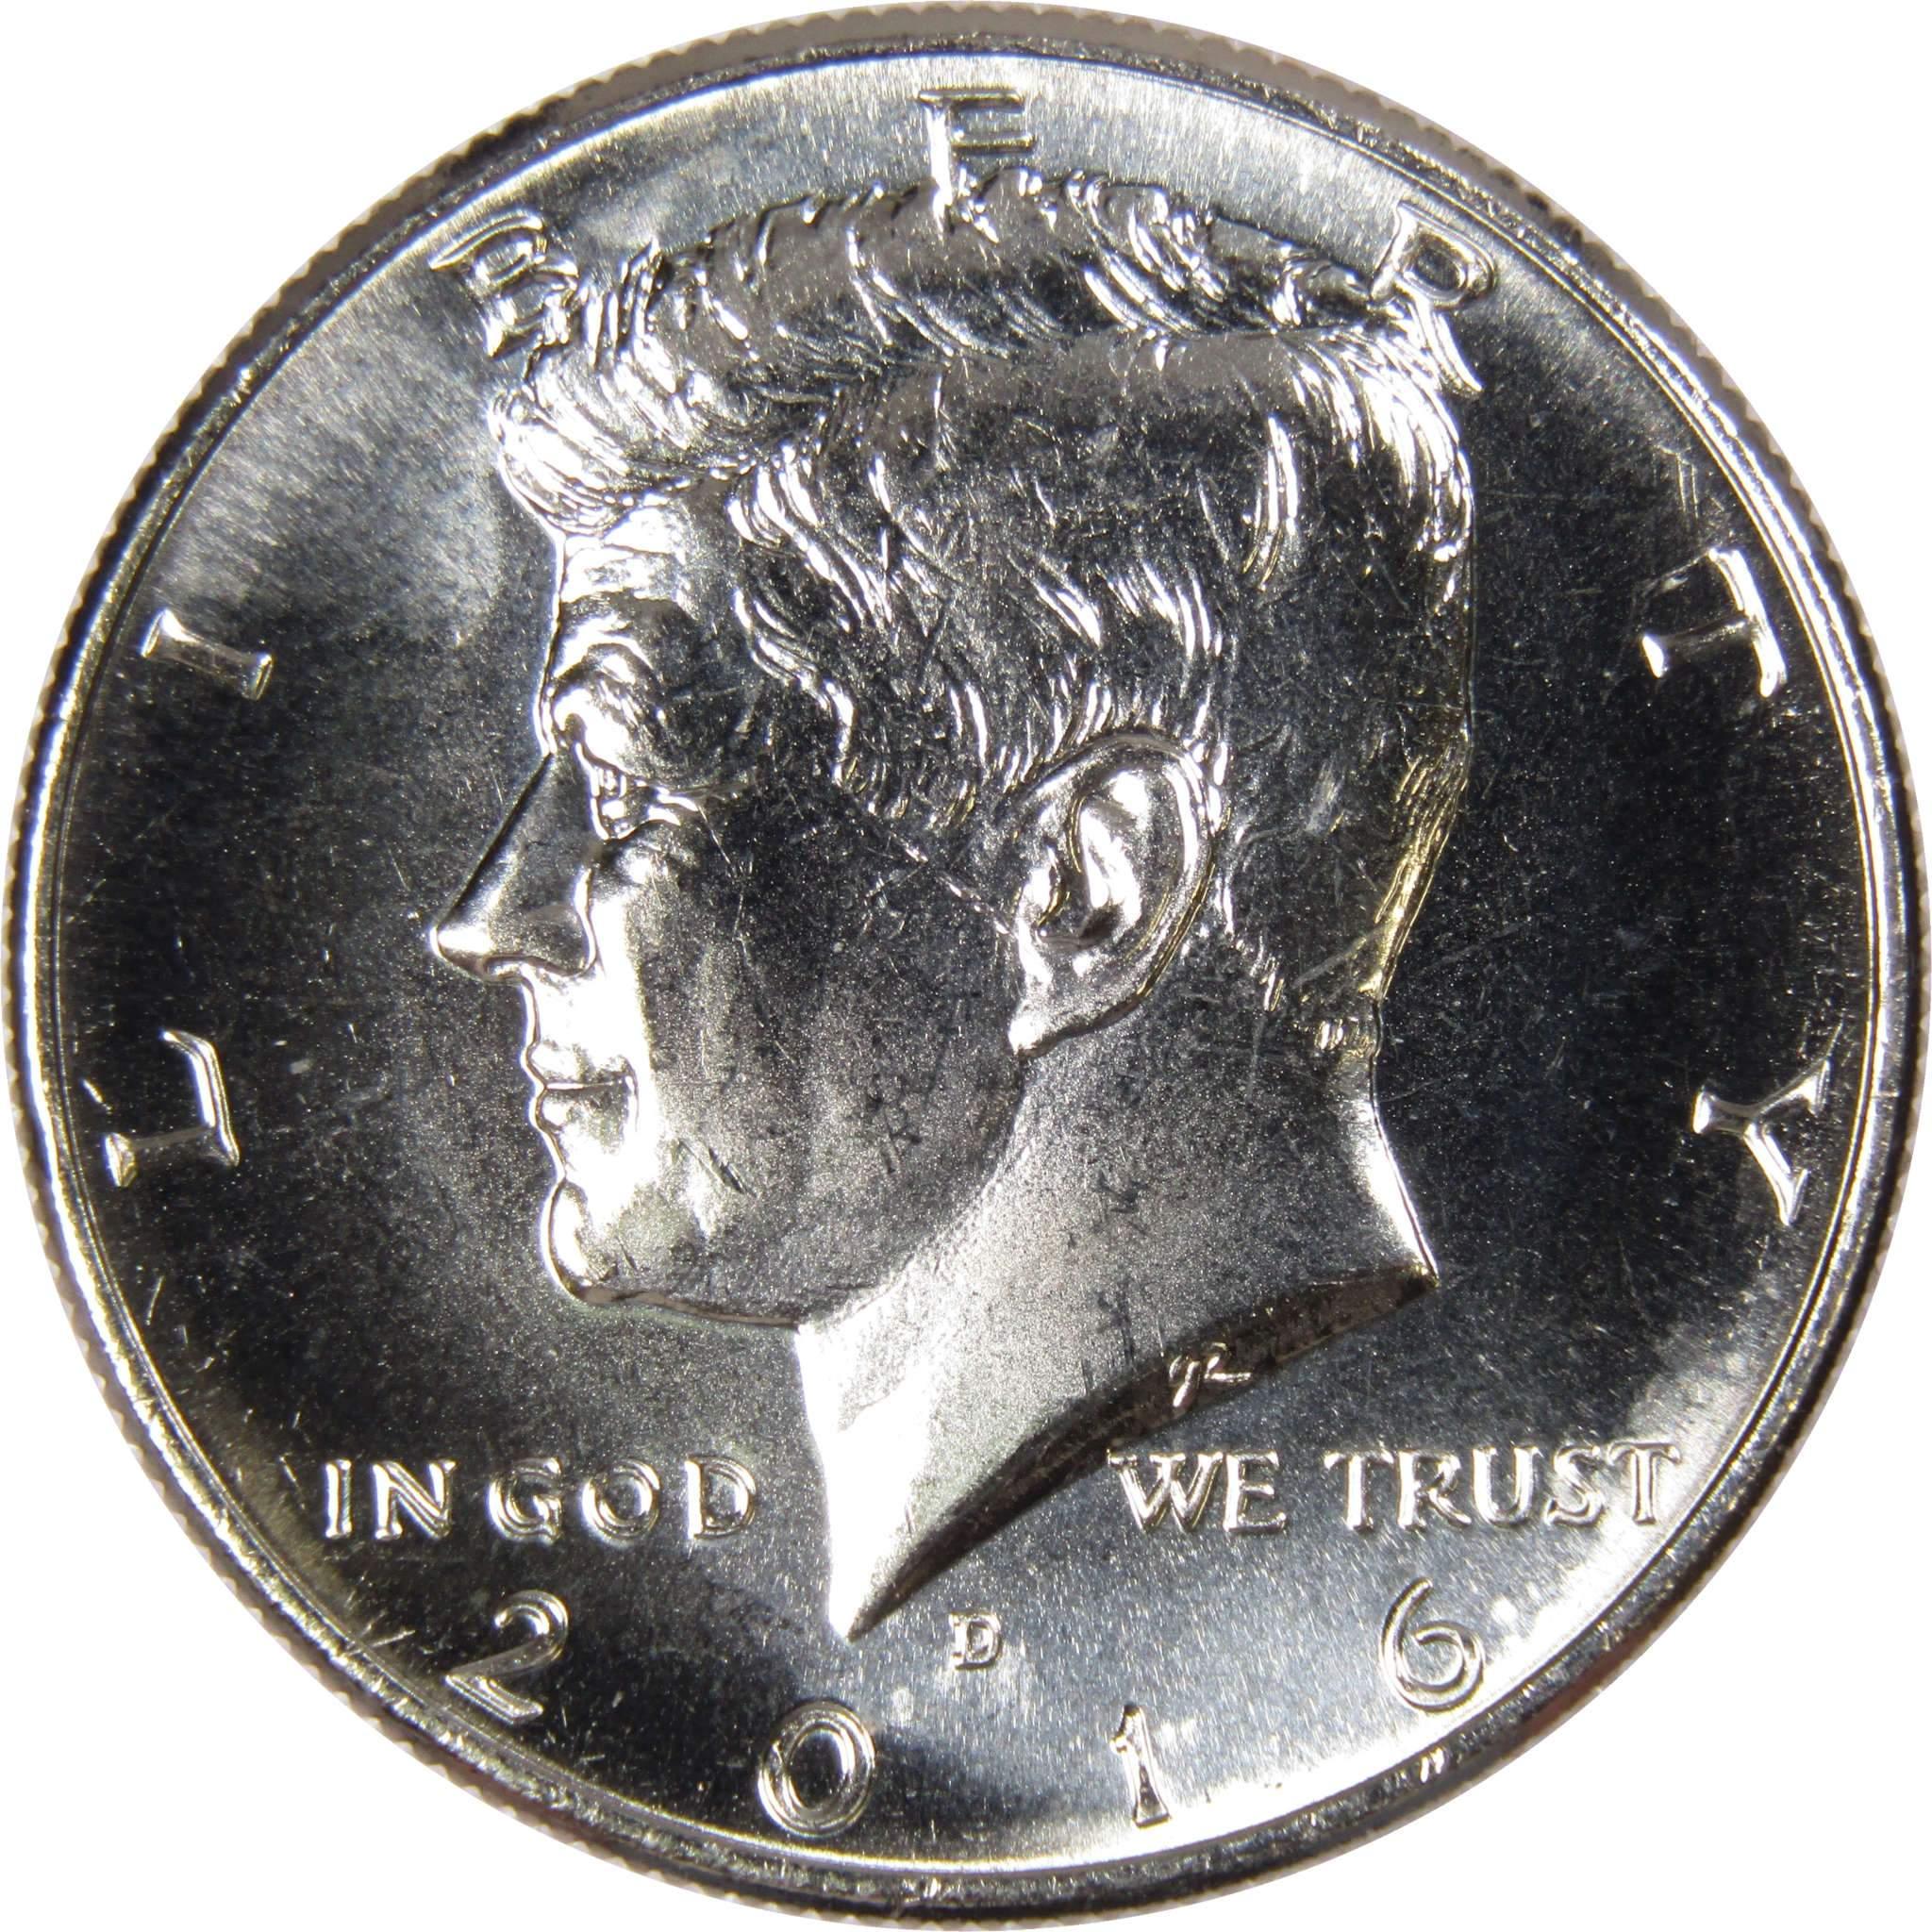 2016 D Kennedy Half Dollar BU Uncirculated Mint State 50c US Coin Collectible